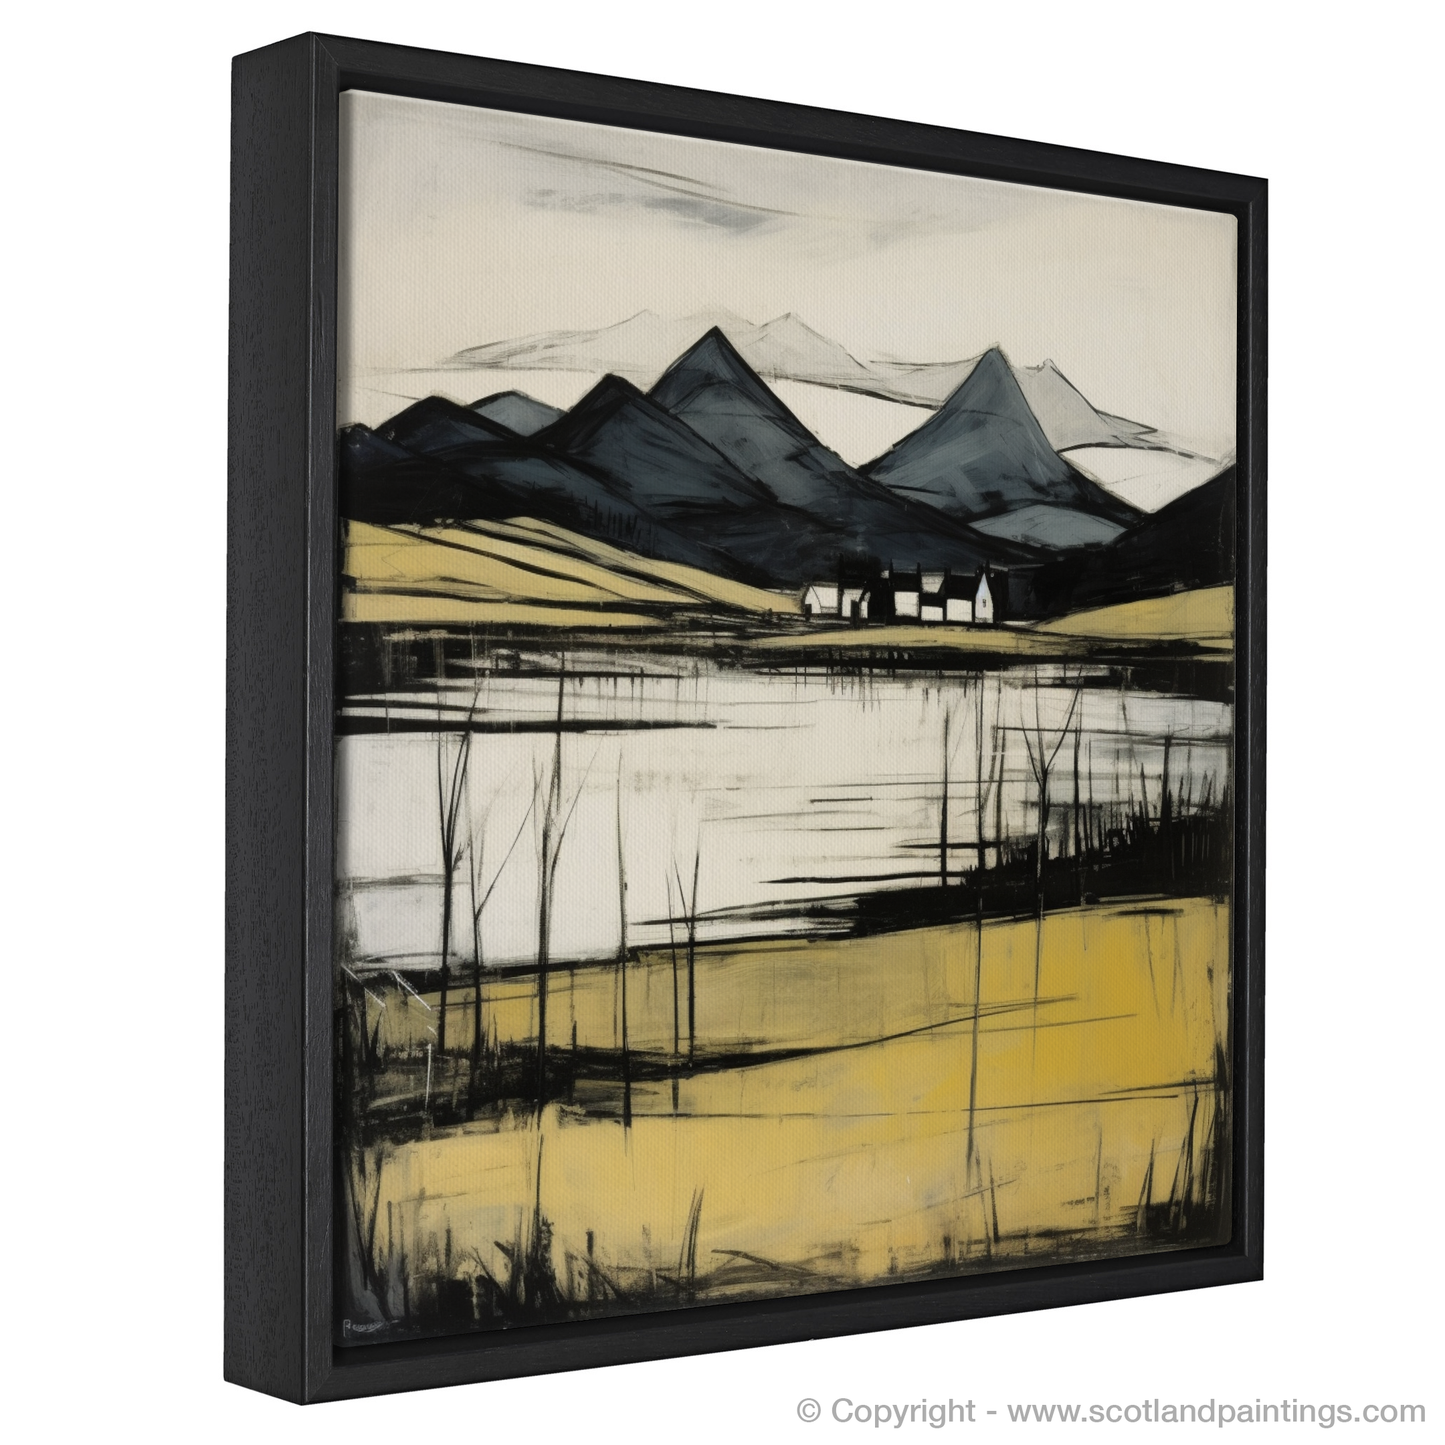 Painting and Art Print of Loch Awe, Argyll and Bute entitled "Loch Awe's Untamed Majesty: An Illustrative Expressionist Ode".